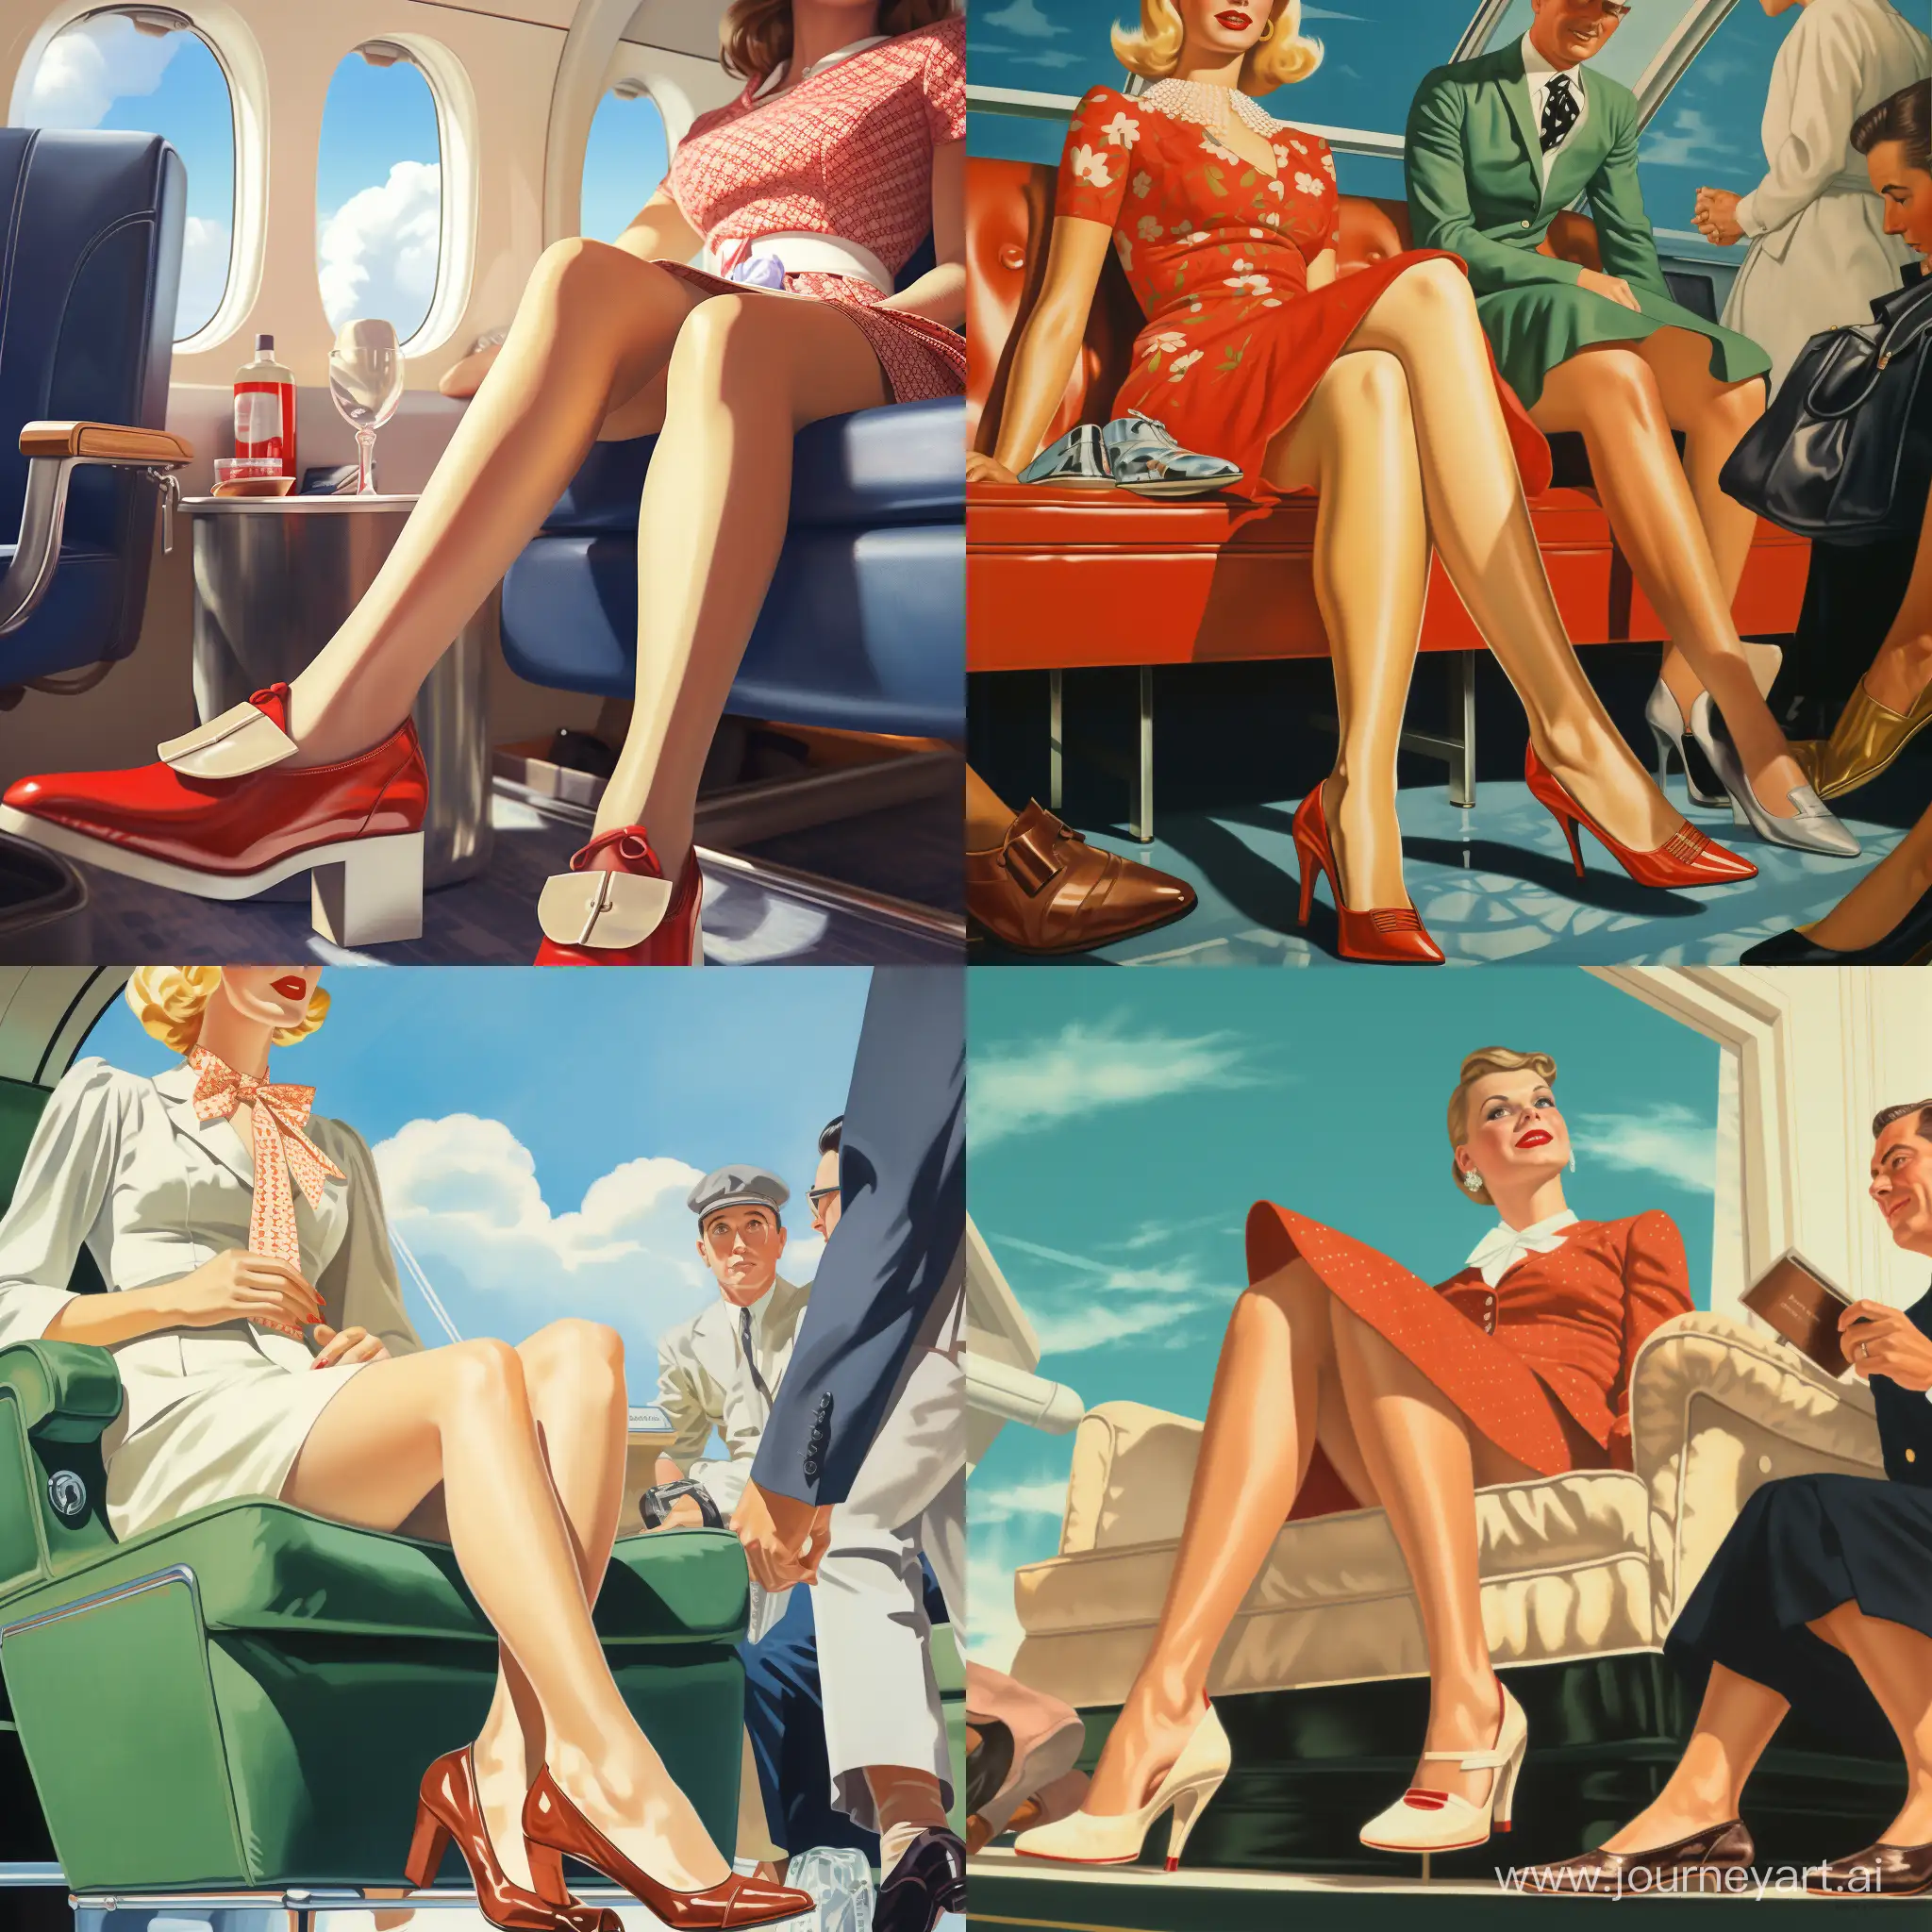 Luxurious-Air-Travel-Stylish-Woman-in-First-Class-Receives-Shoe-Shine-from-Flight-Attendants